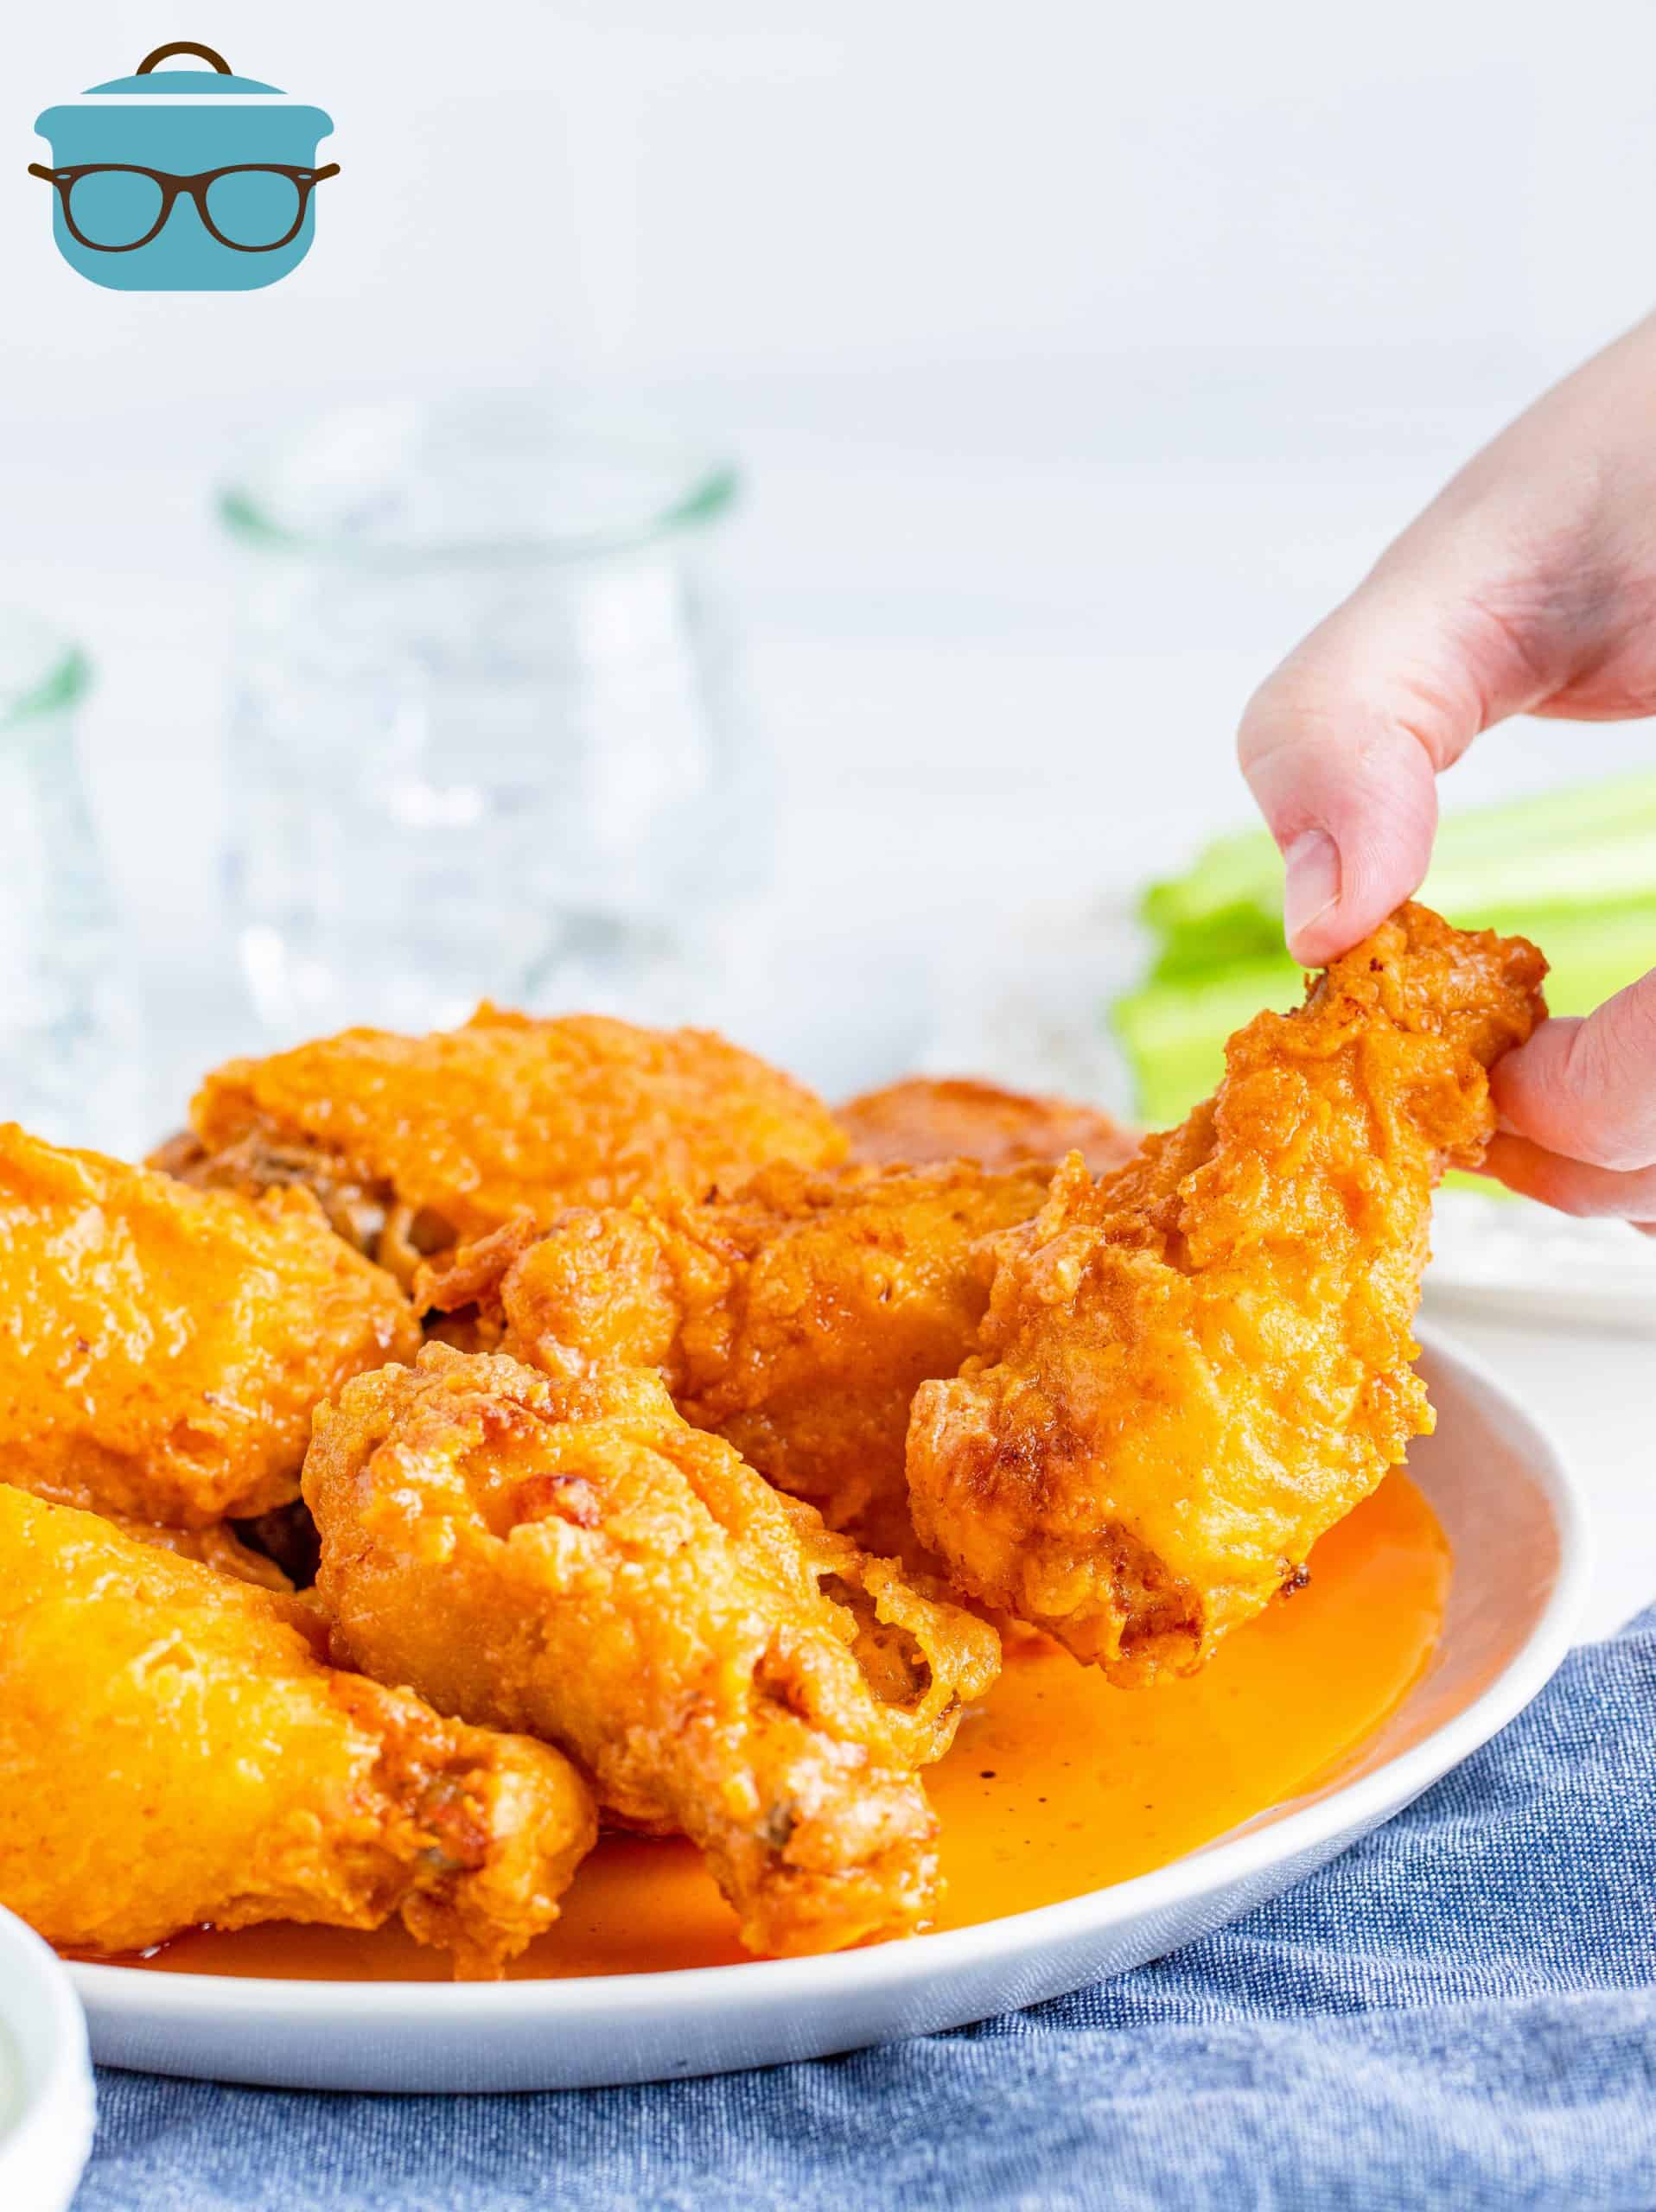 The Best Buffalo Chicken Wings shown on a white plate with one being removed by a person's hand to the side.